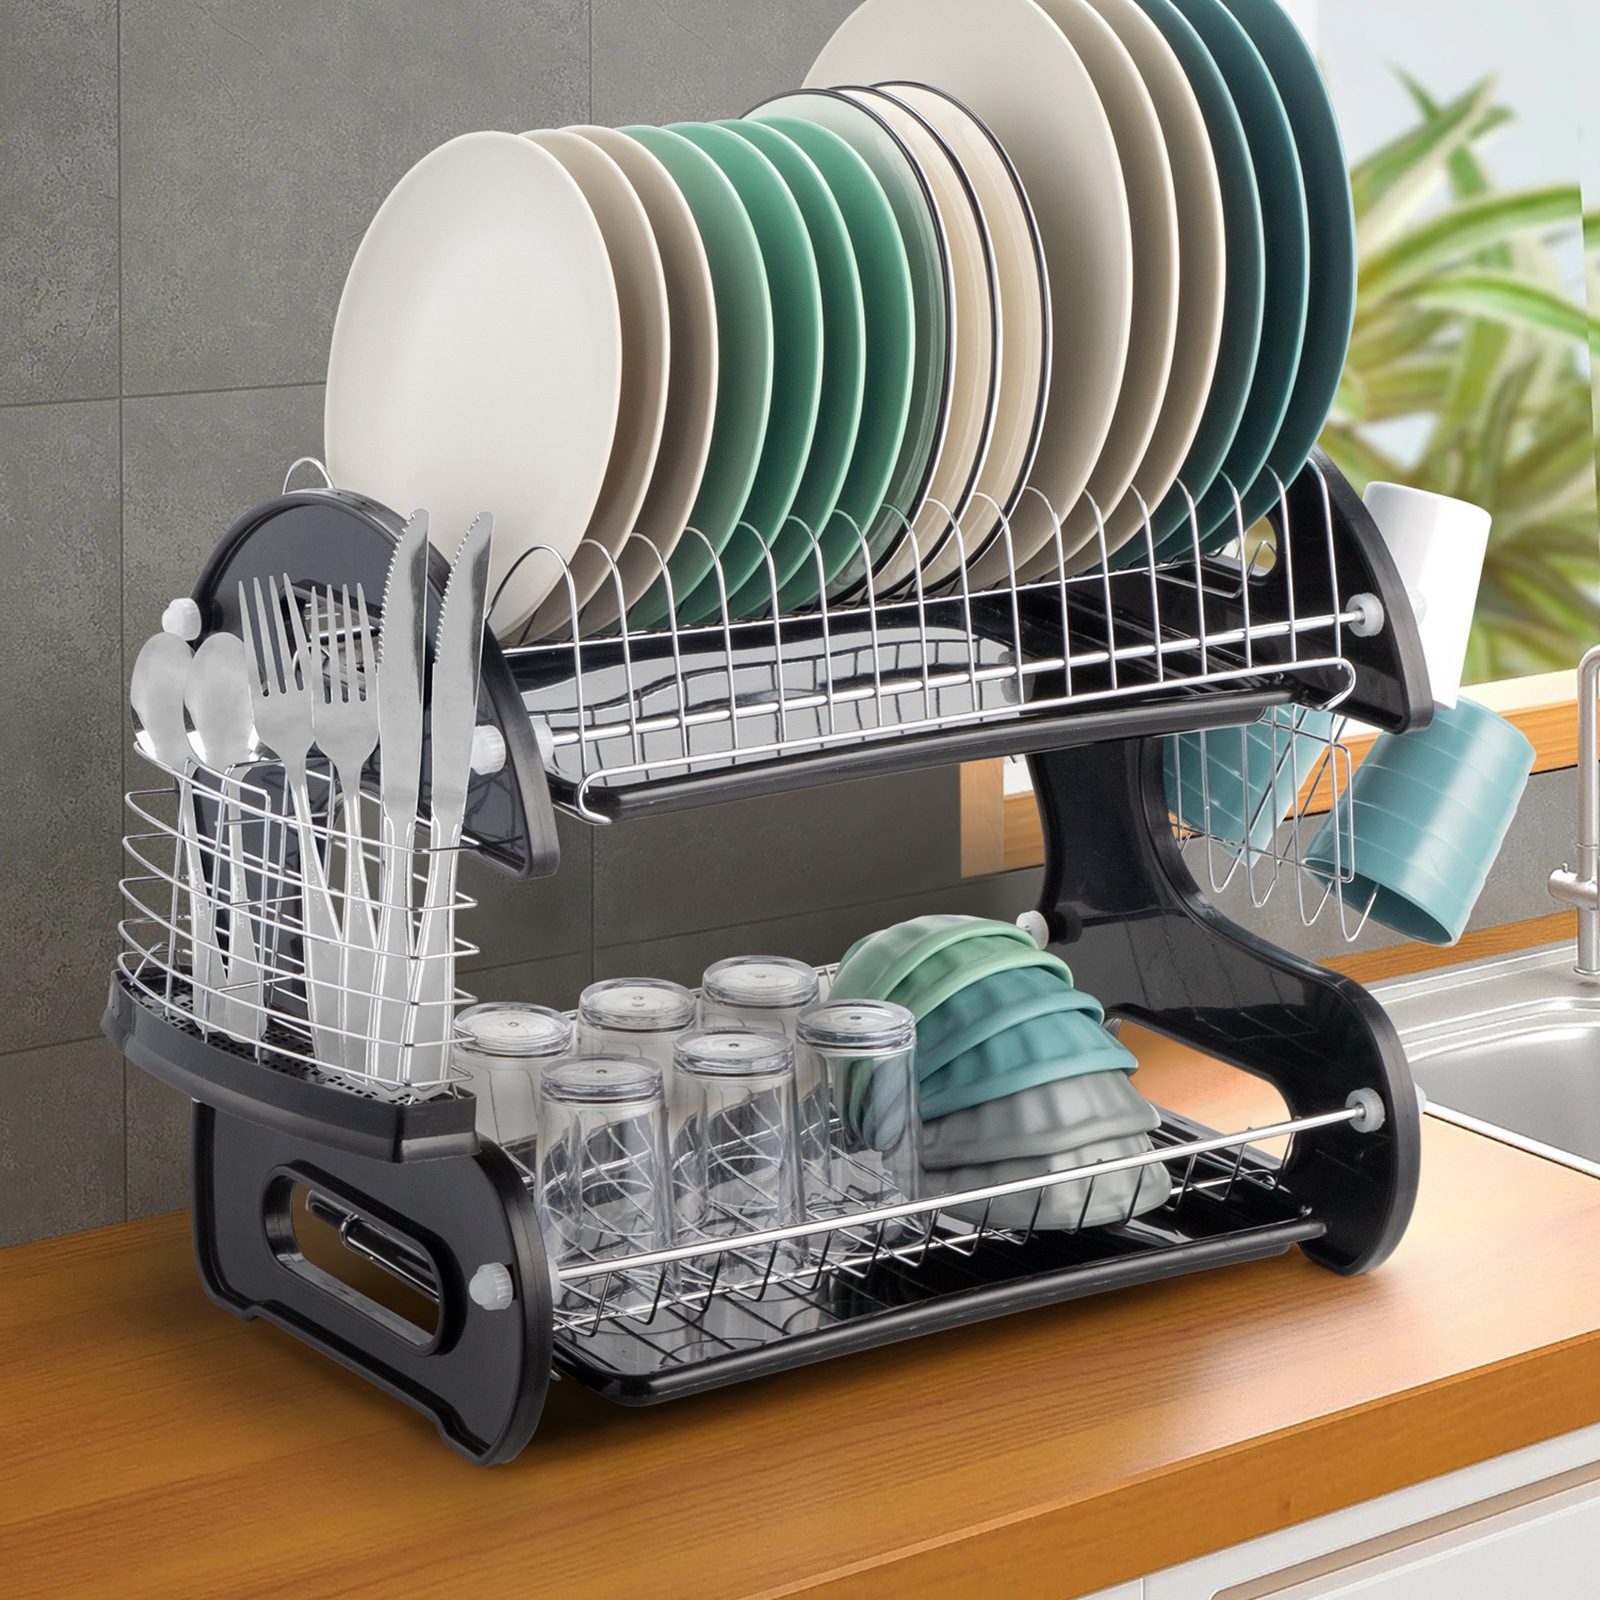 Ktaxon 2 Tier Dish Drainer Drying Rack Large Capacity Kitchen Storage Stainless Steel Holder,Washing Organizer - Overall Dimensions: 22.83" x 11" x 14.57" (L x W x H) - image 1 of 10